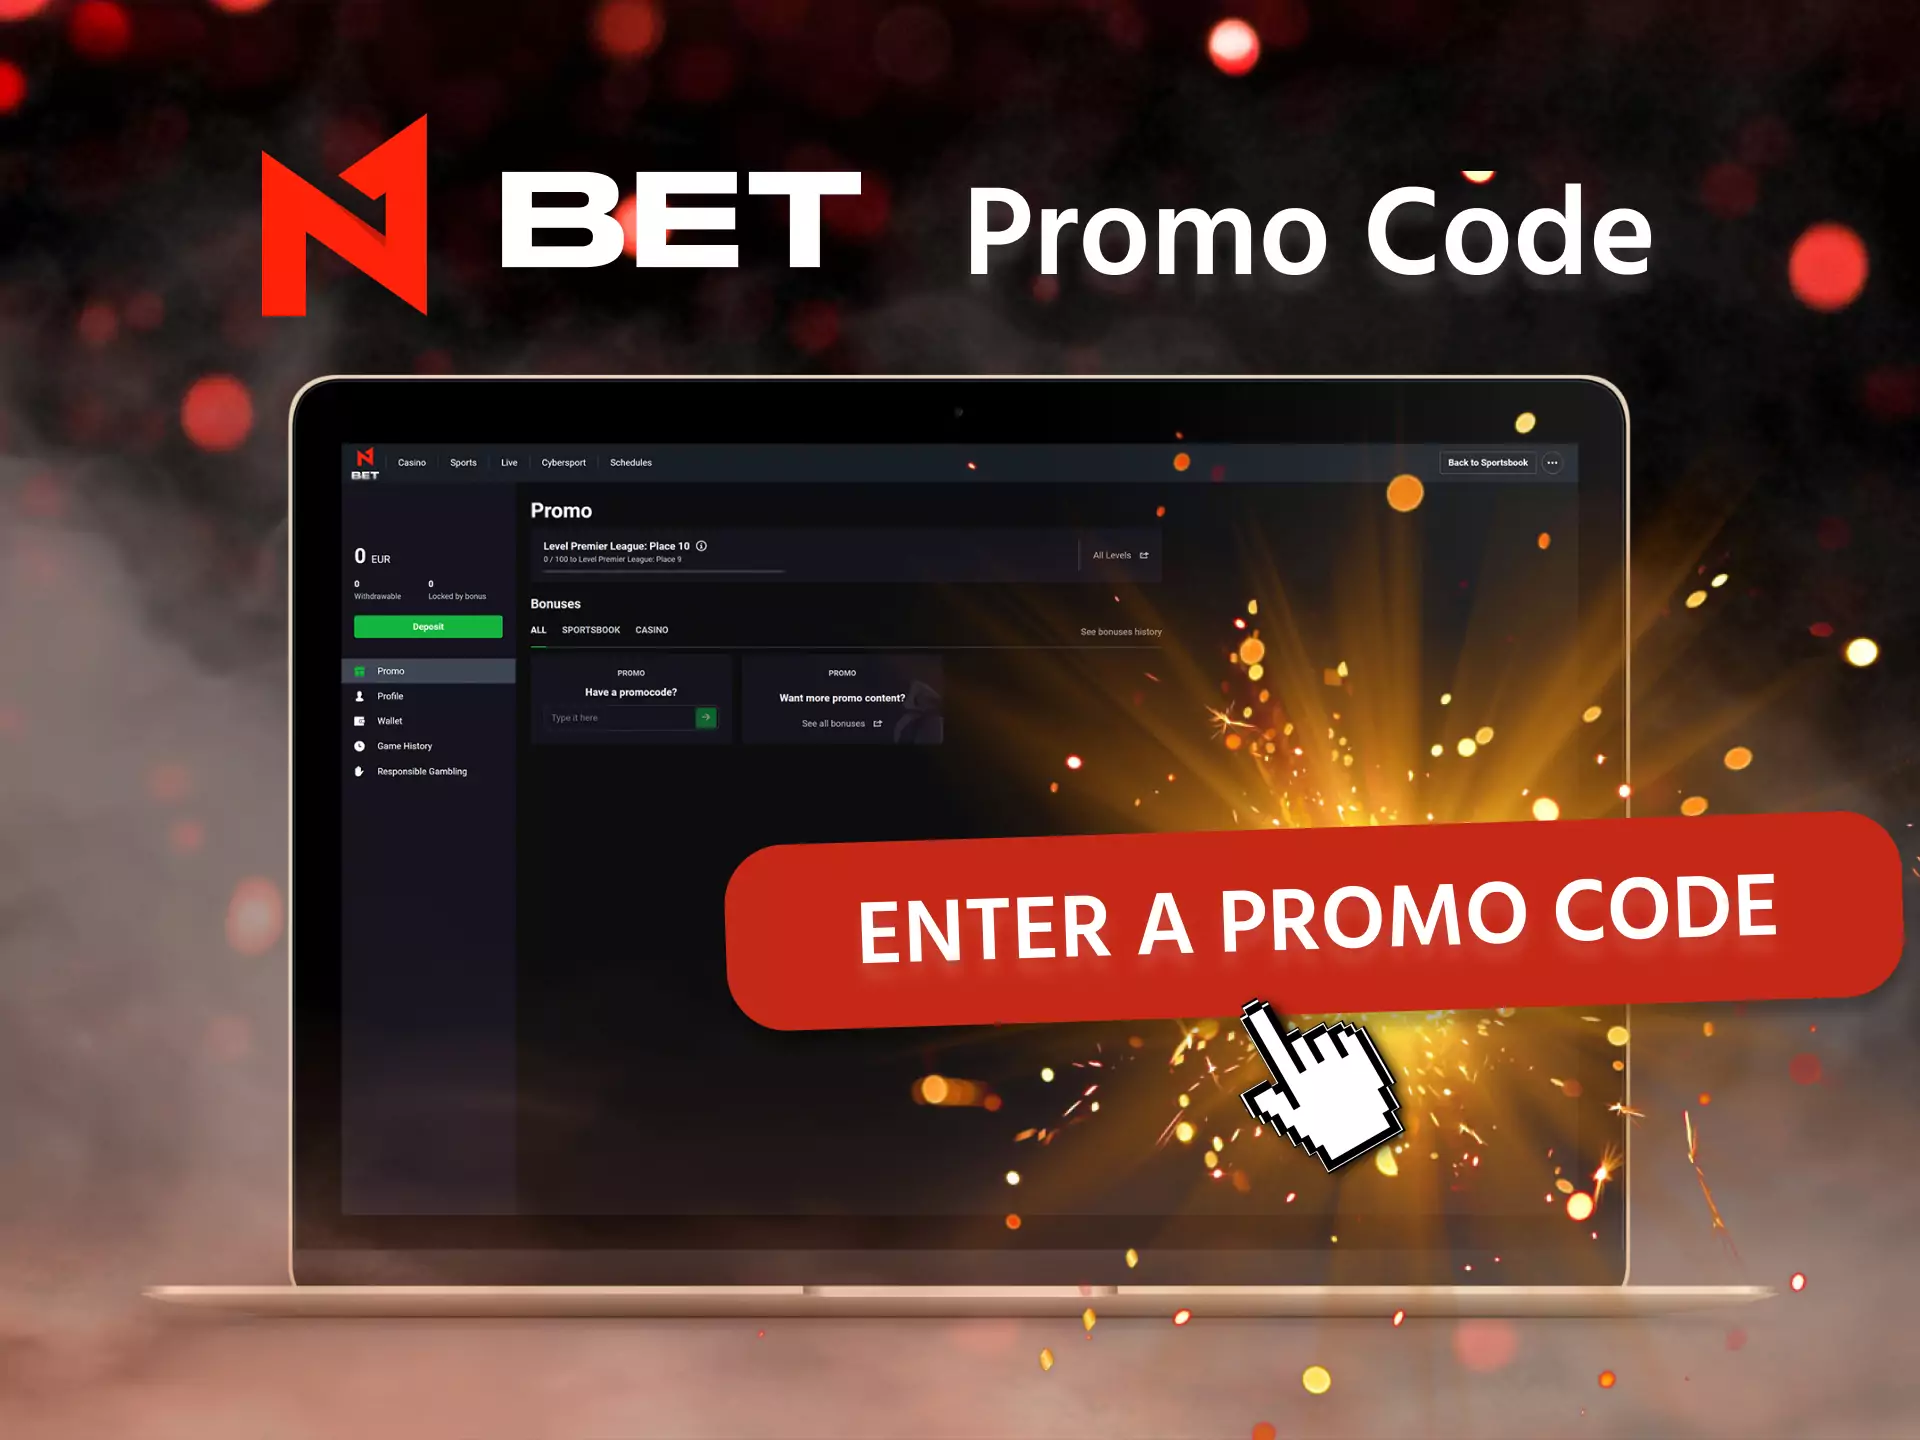 Apply the special promo code N1Bet and get the benefits.